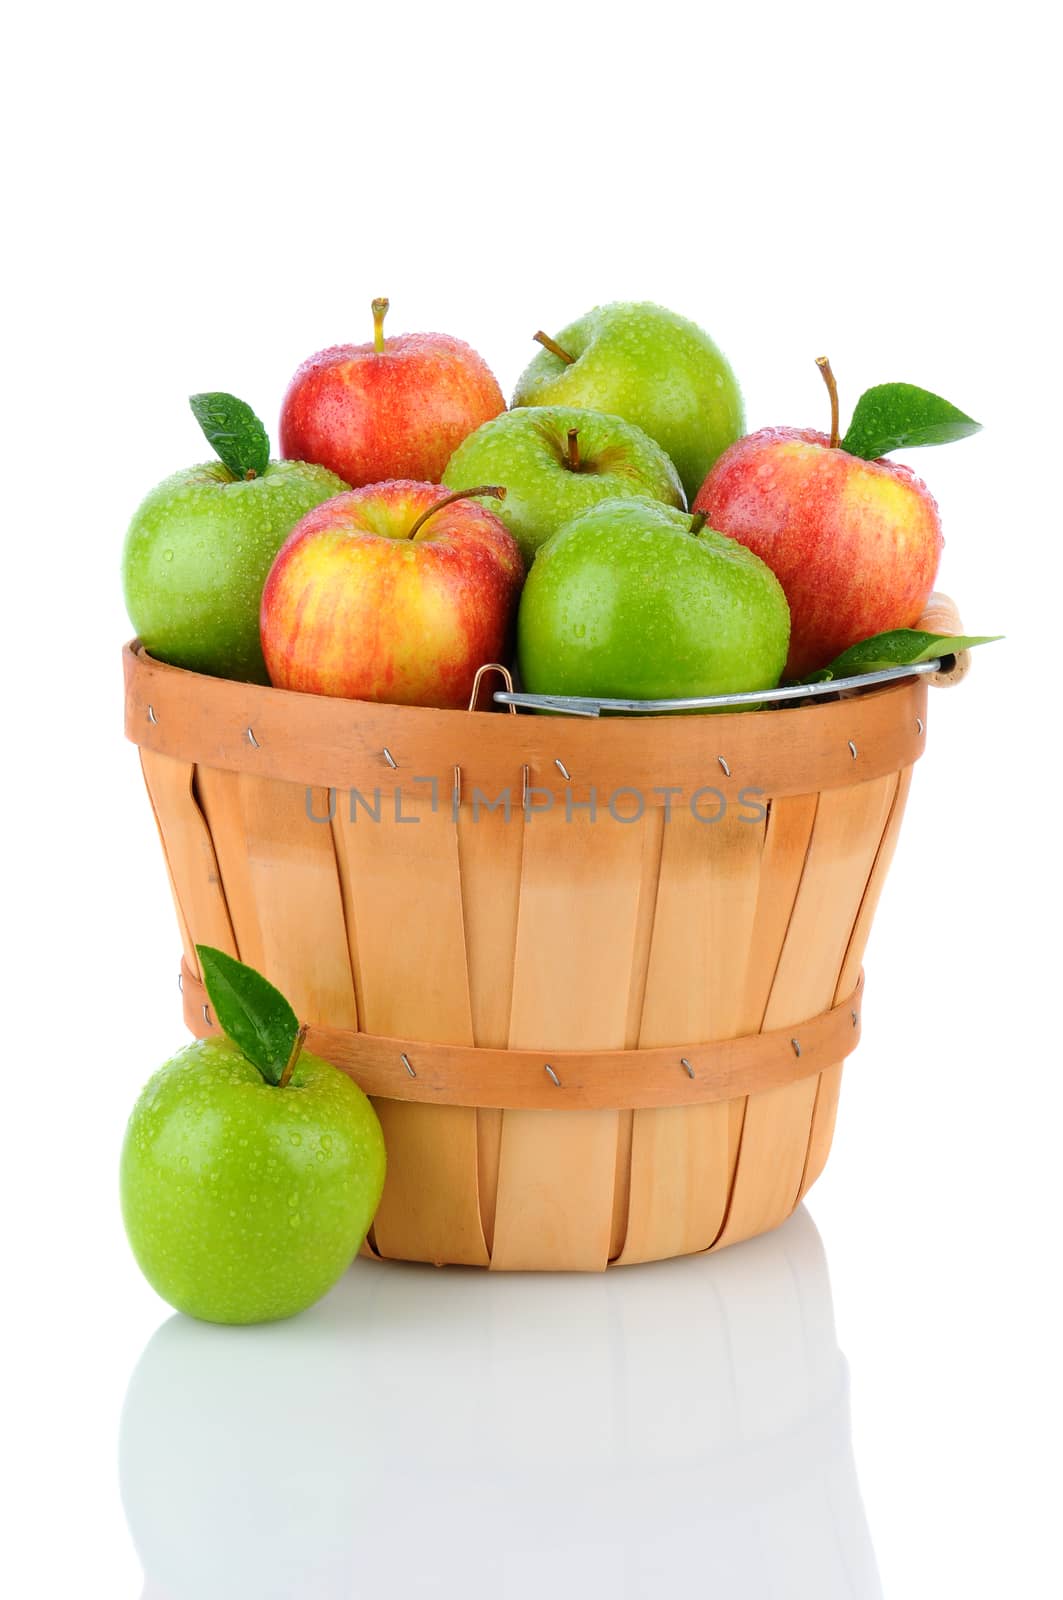 Granny Smith and Gala Apples in a Basket by sCukrov